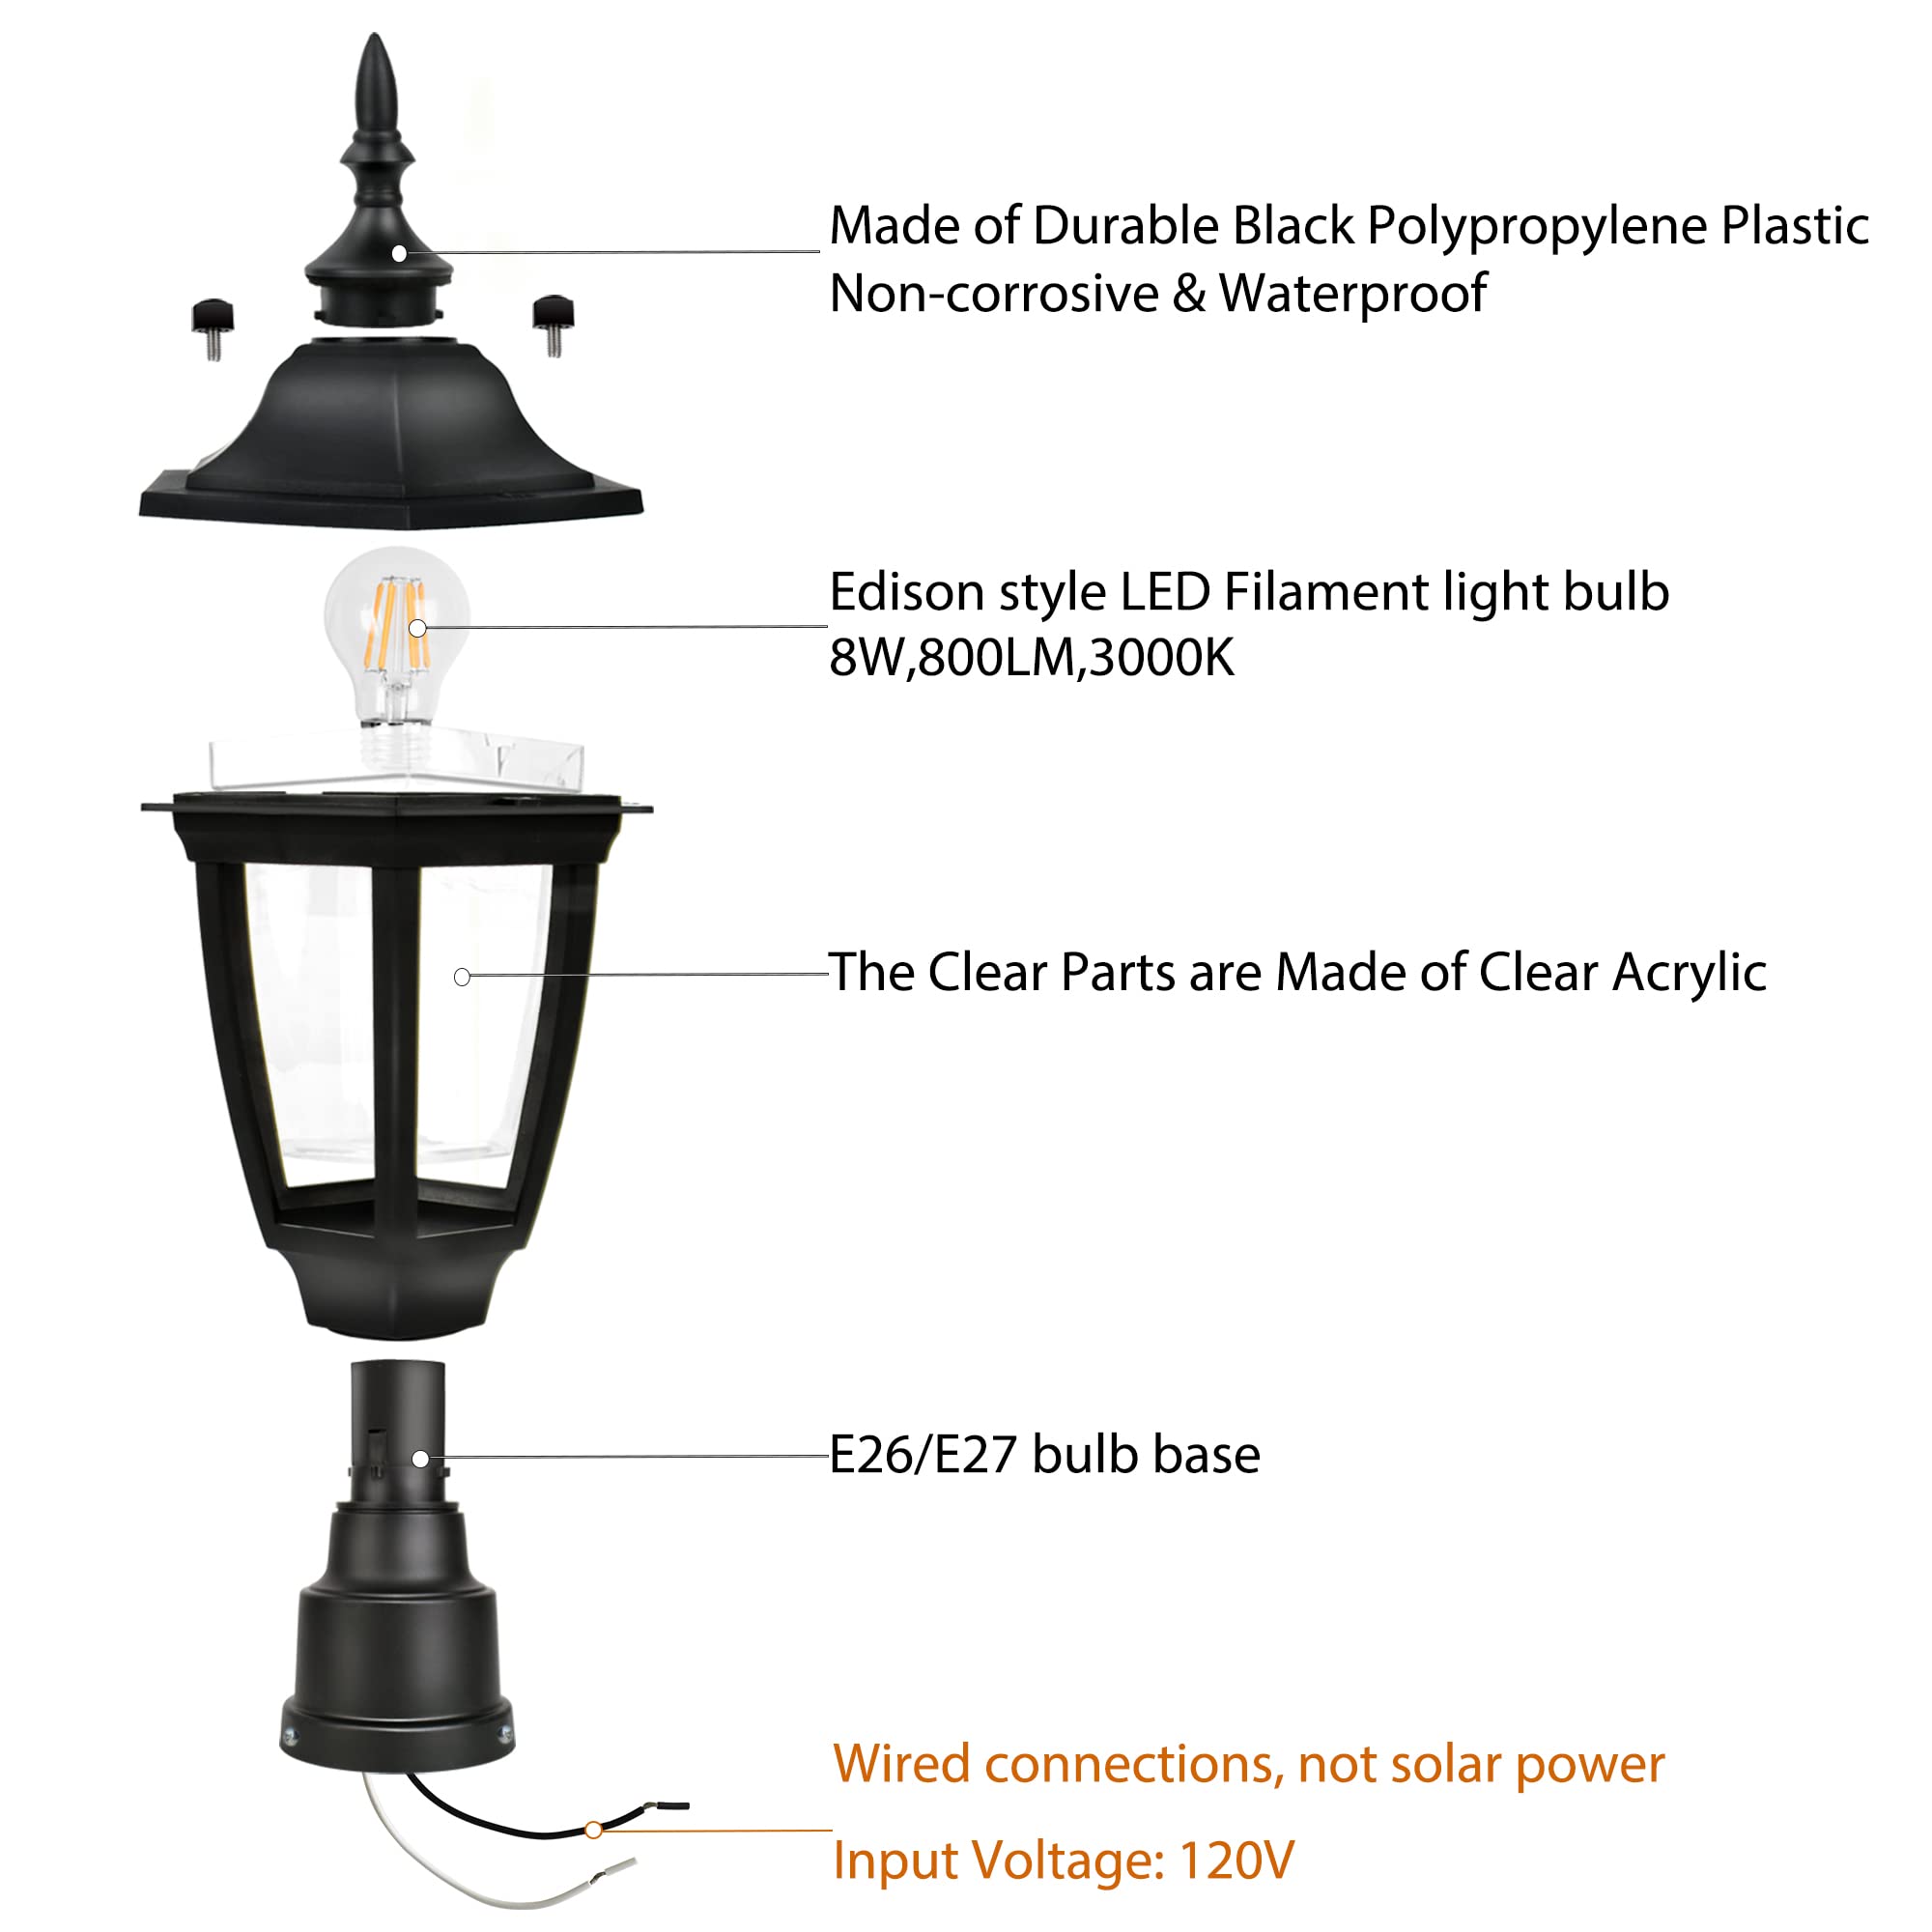 FUDESY Outdoor Post Lights, Electric Exterior Lamp Post Light Fixture with Pier  Mount Base, LED Bulb Included, Anti Corrosion Black Plastic Materials,  2-Pack Pole Lanterns for Garden, Patio, Pathway Walmart Canada